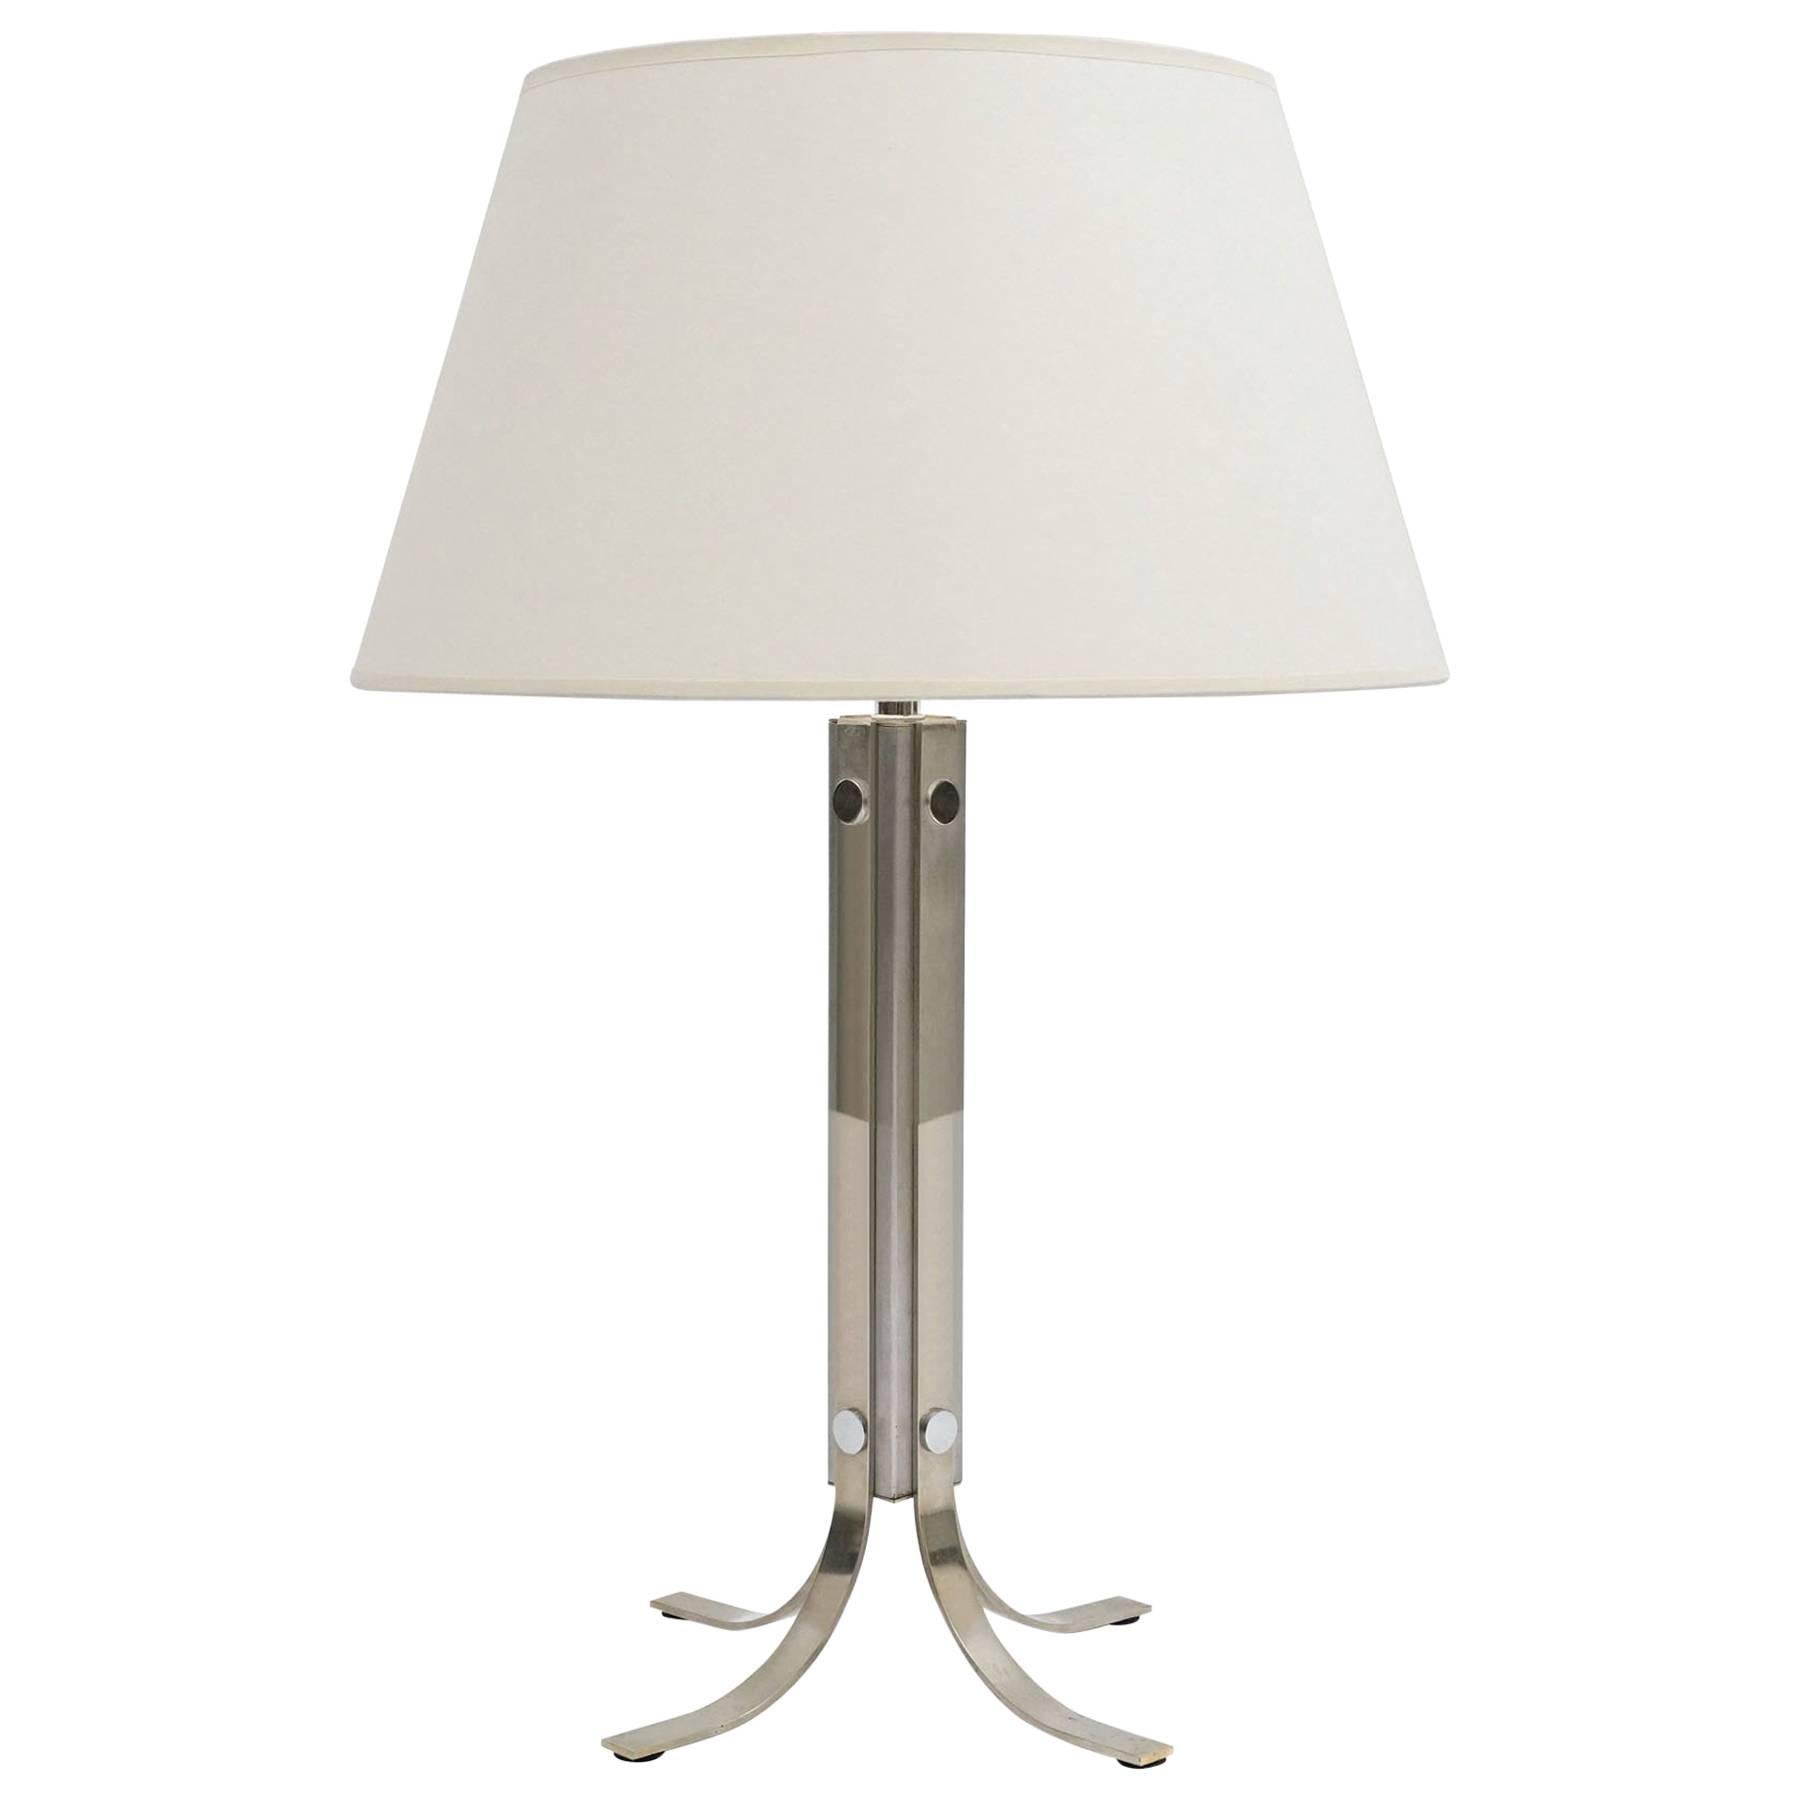 French Modernist Chrome Column Table Lamp, circa 1970s For Sale